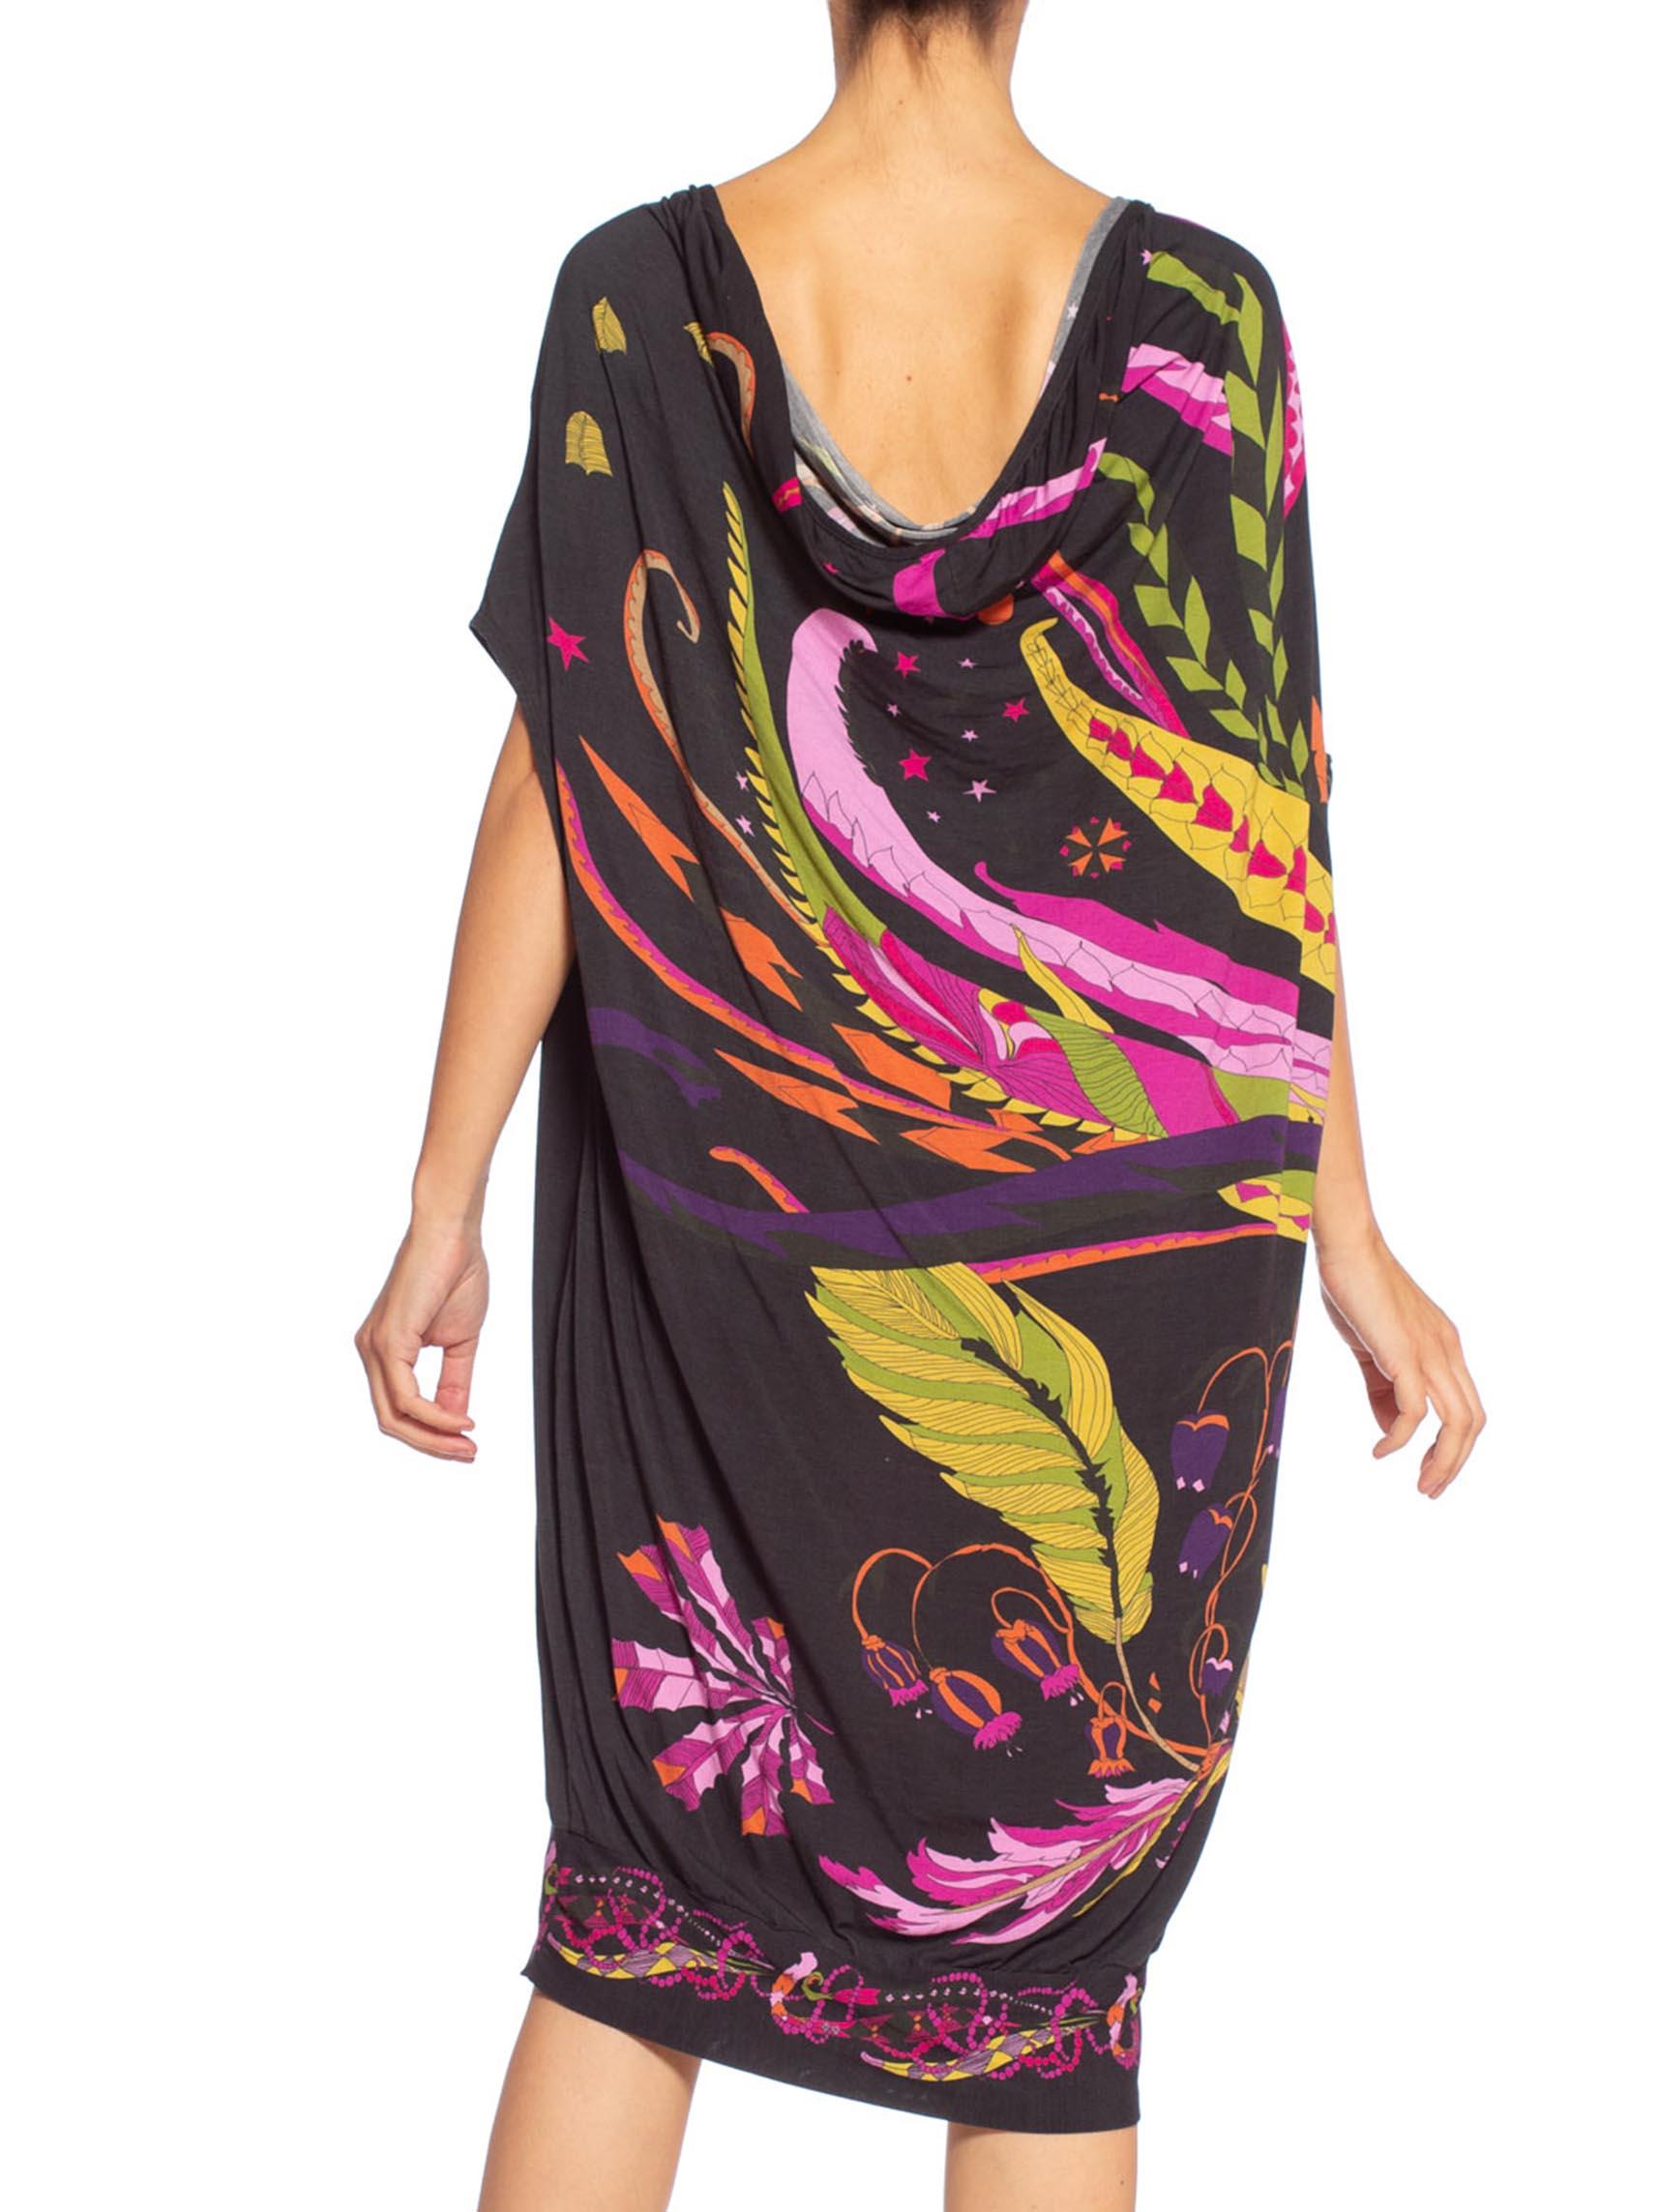 MORPHEW COLLECTION 1970'S Psychedelic Fortune Teller Print Dress 5